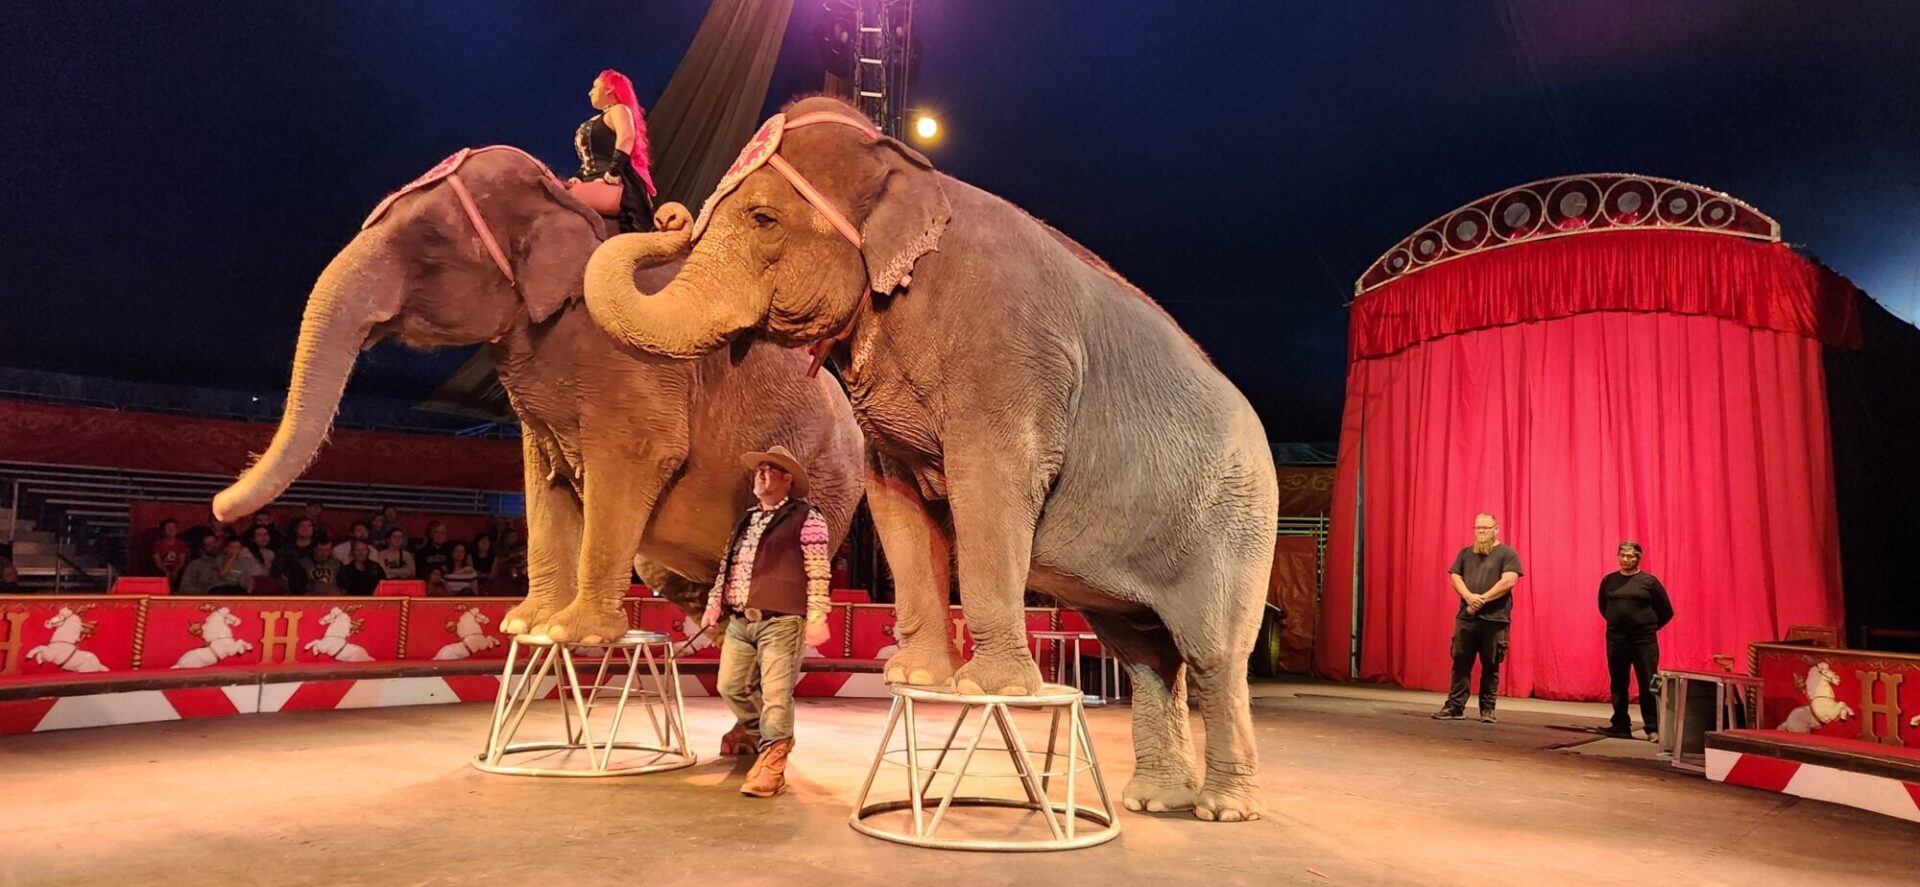 Circus elephants in the show